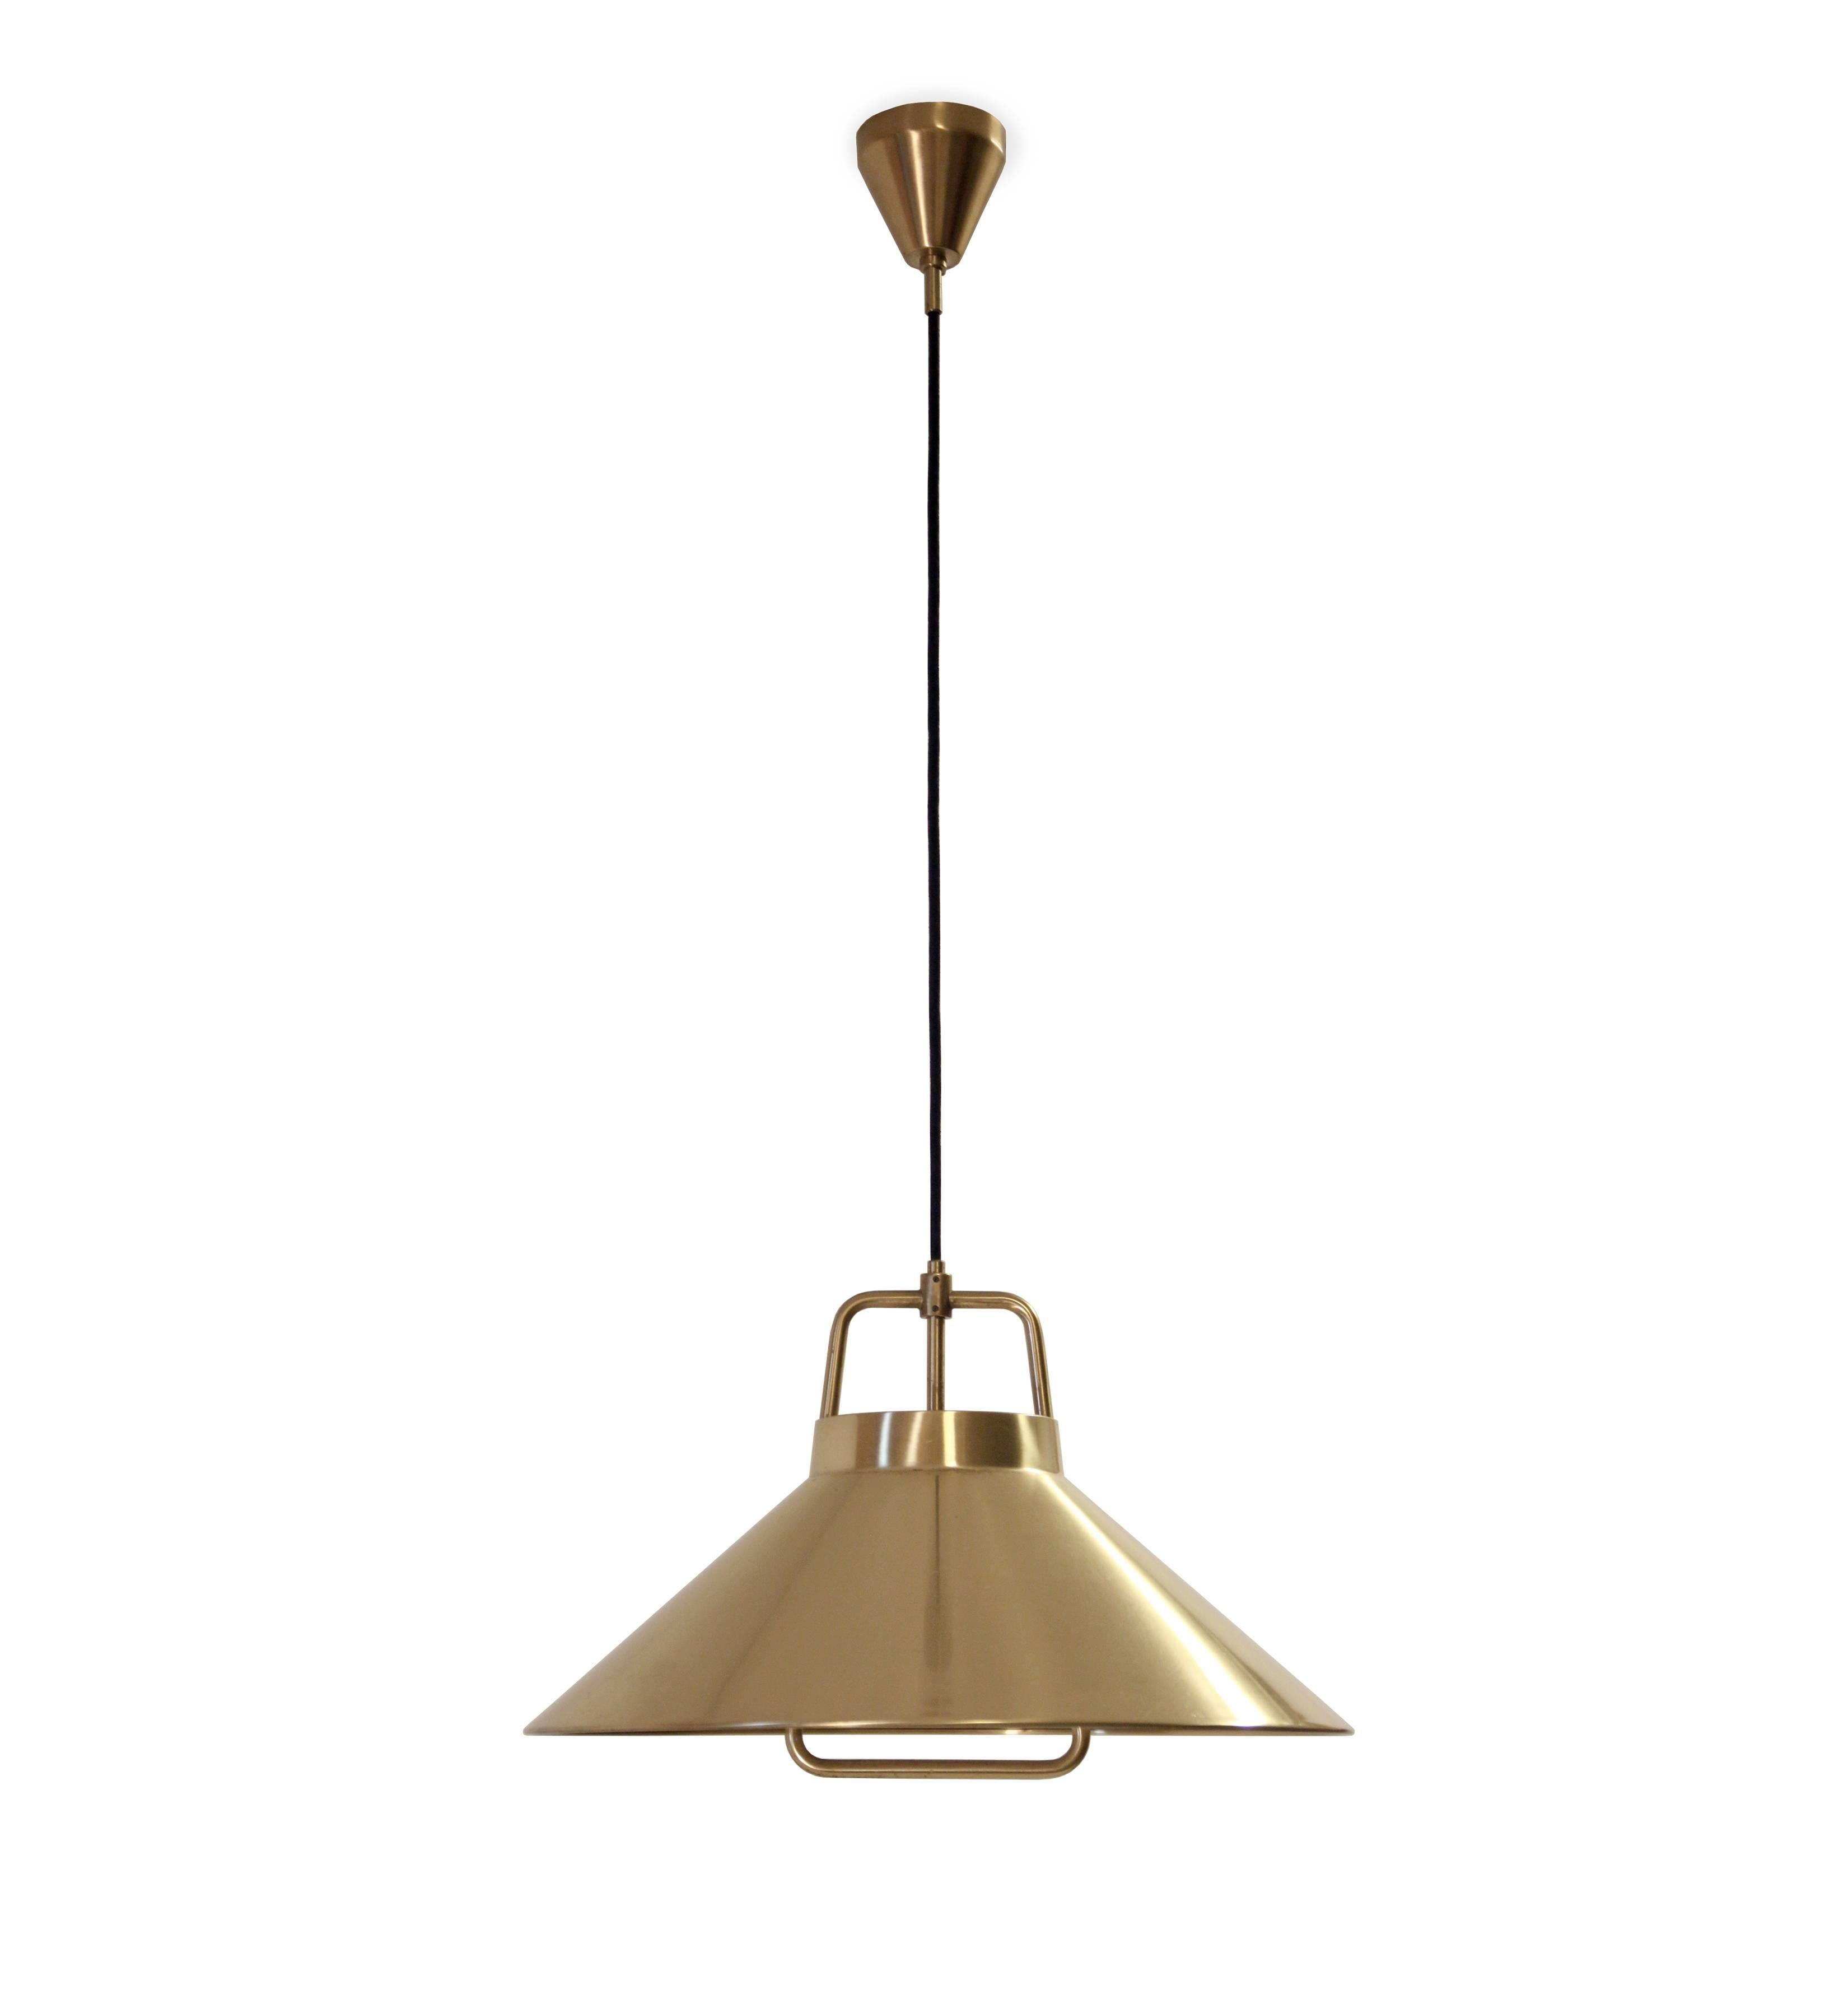 Mid-Century Modern Midcentury Ceiling Light in Brass by Lyfa, 1960s For Sale